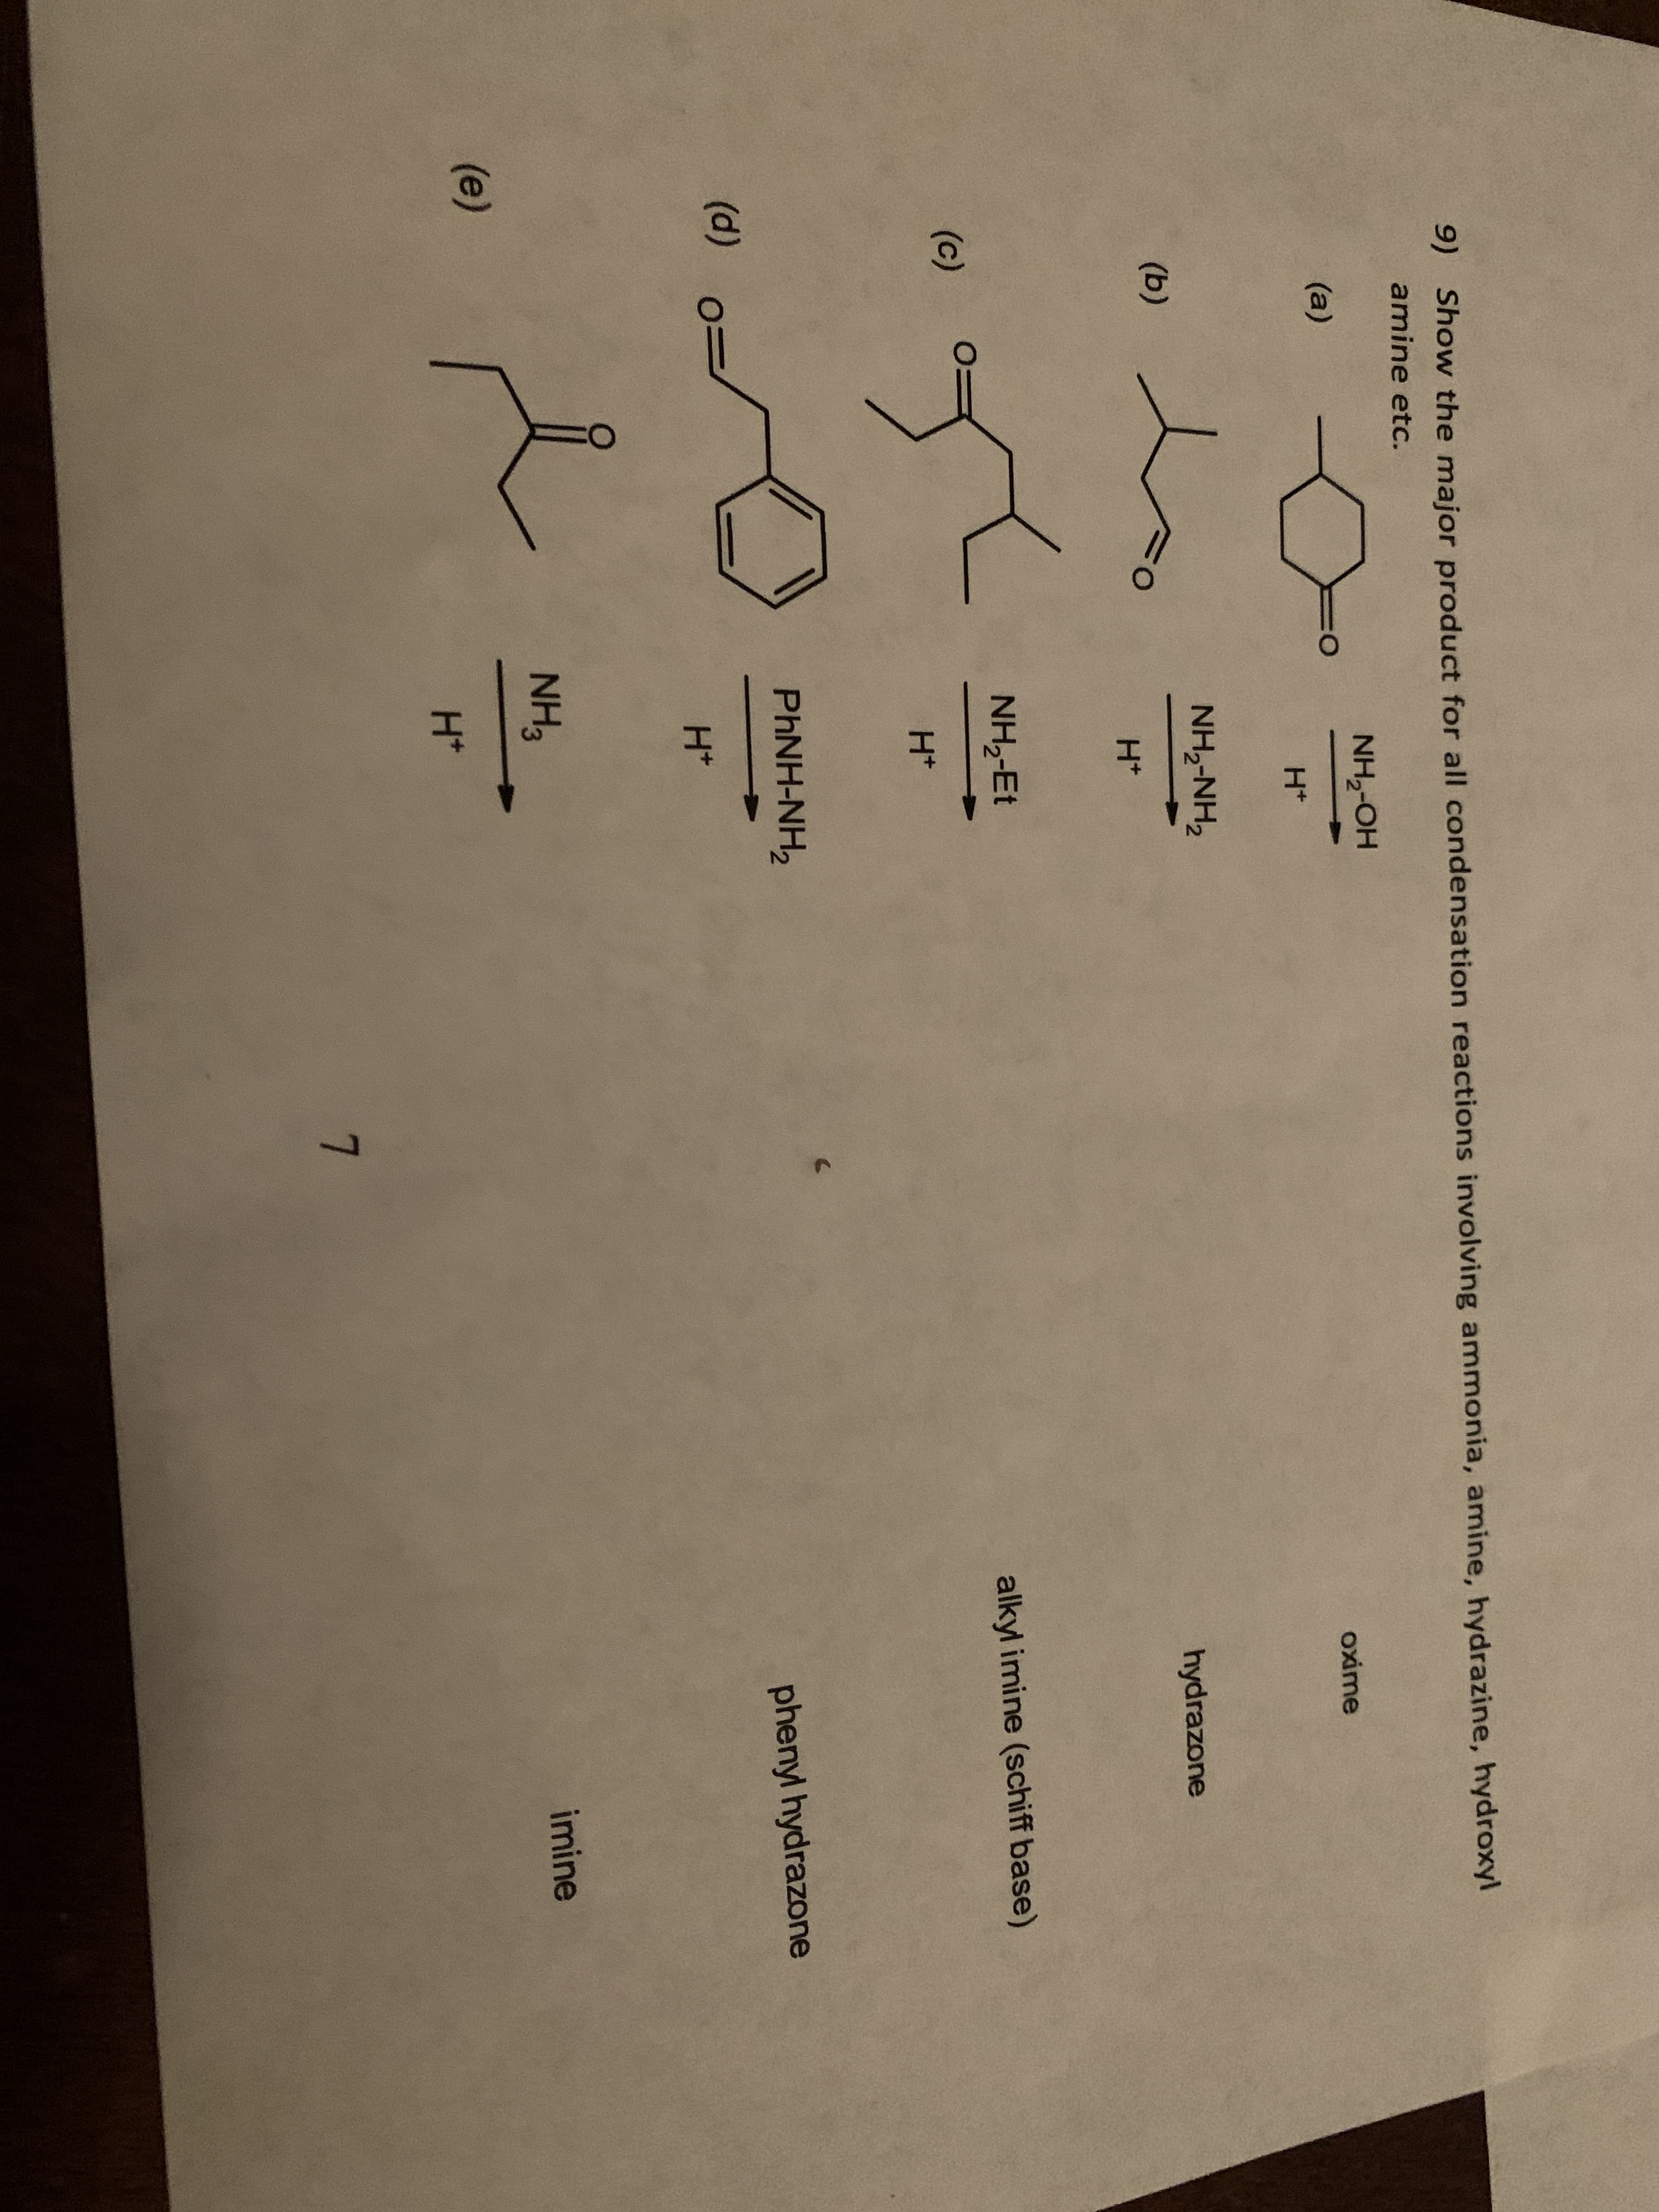 9) Show the major product for all condensation reactions involving ammonia, amine, hydrazine, hydroxyl
amine etc.
NH,-OH
(a)
oxime
H+
NH,-NH,
(b)
hydrazone
H*
NH,-Et
alkyl imine (schiff base)
(c)
H*
PHNH-NH,
phenyl hydrazone
(d)
H*
NH3
imine
(e)
H+
7.
